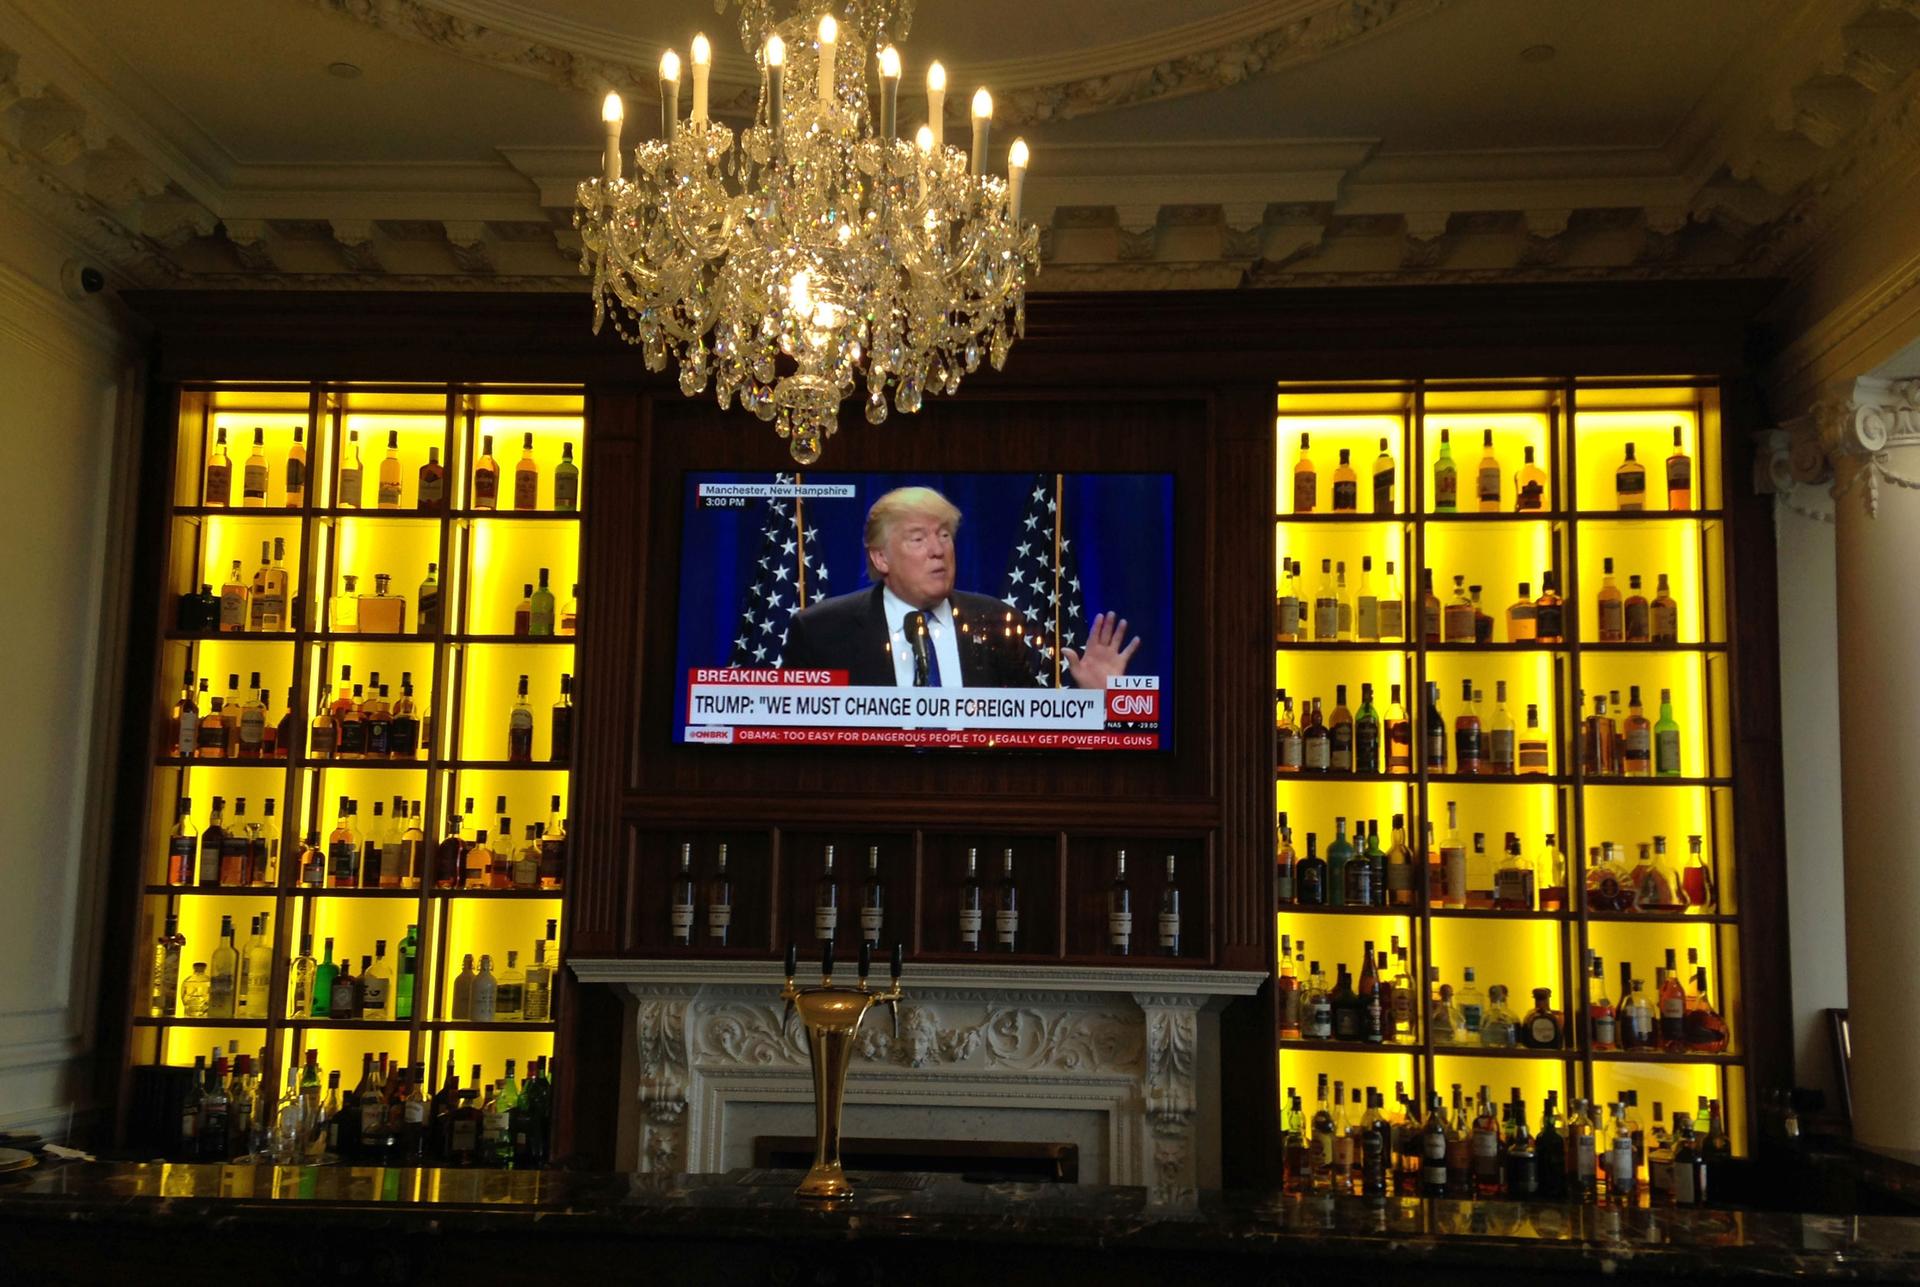 A TV screen on a bar shows US President Donald Trump